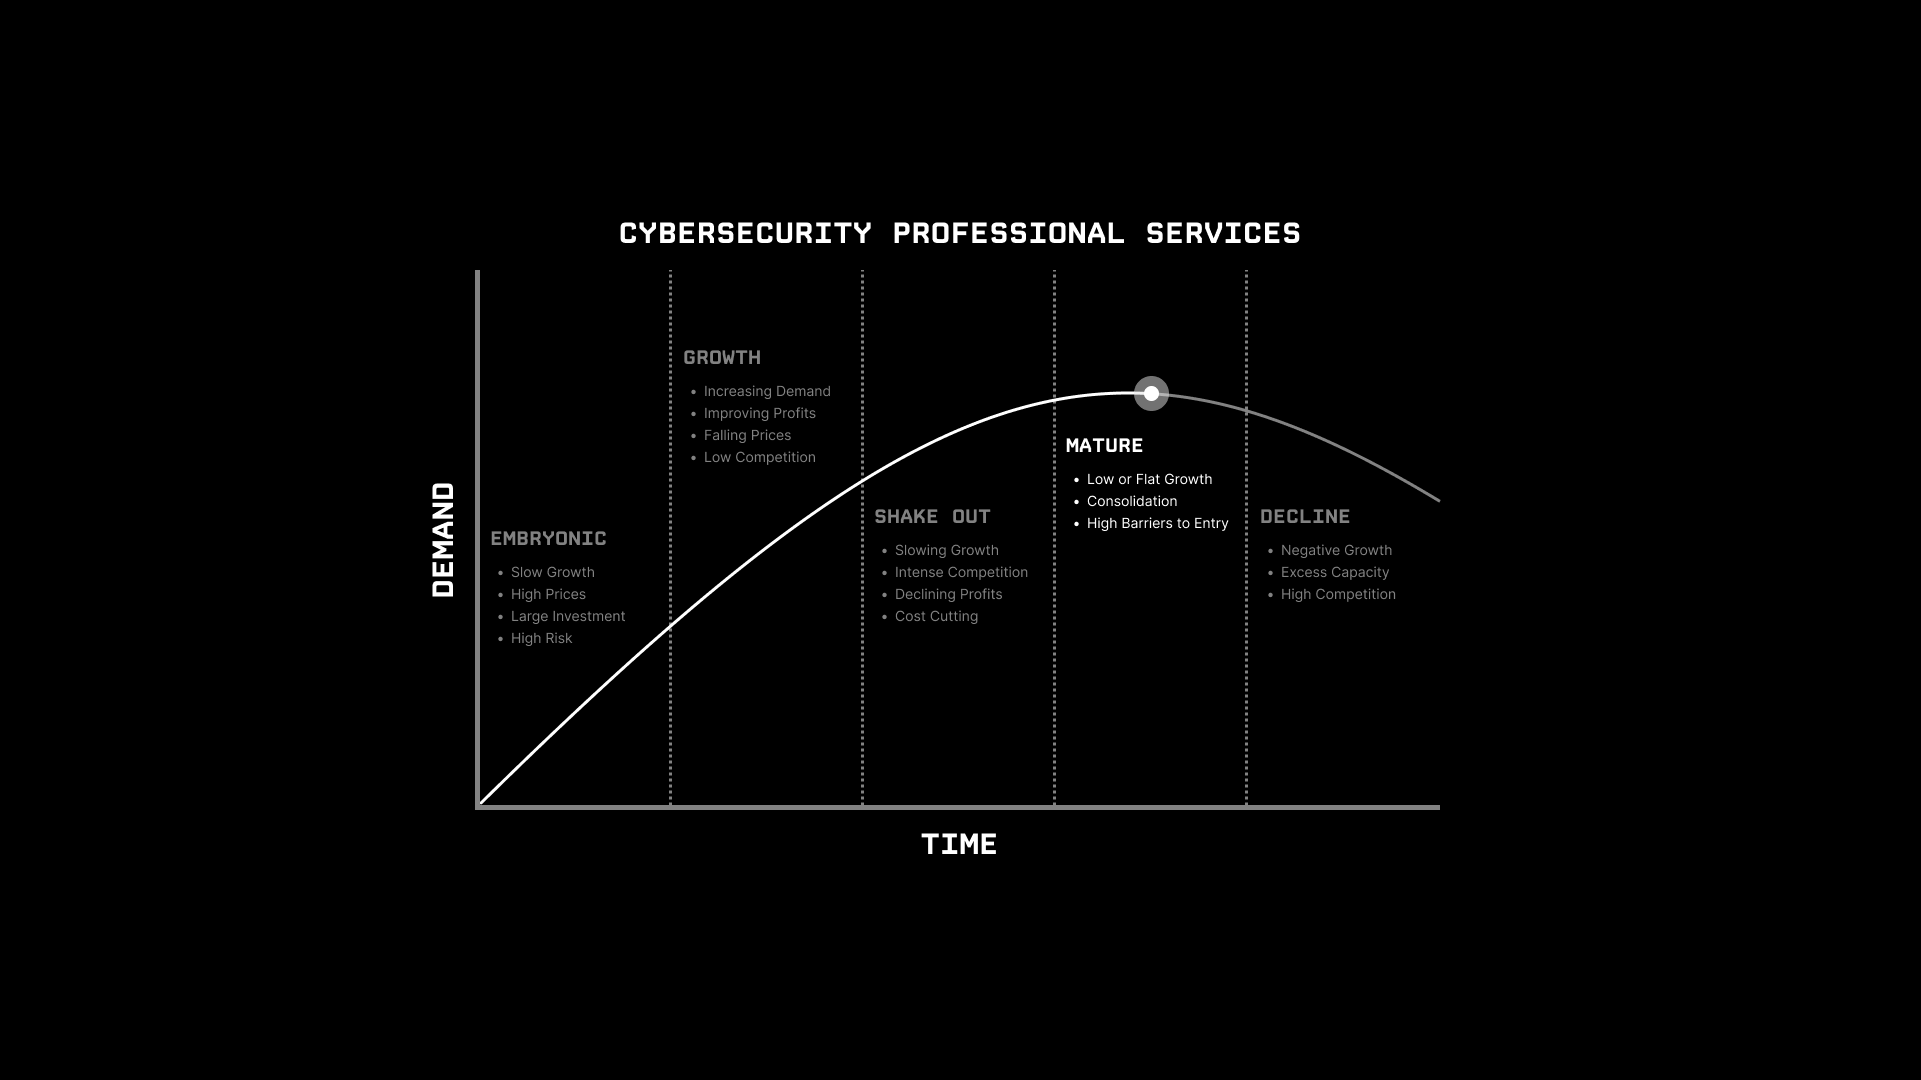 Industry lifecycle for cybersecurity professional services.